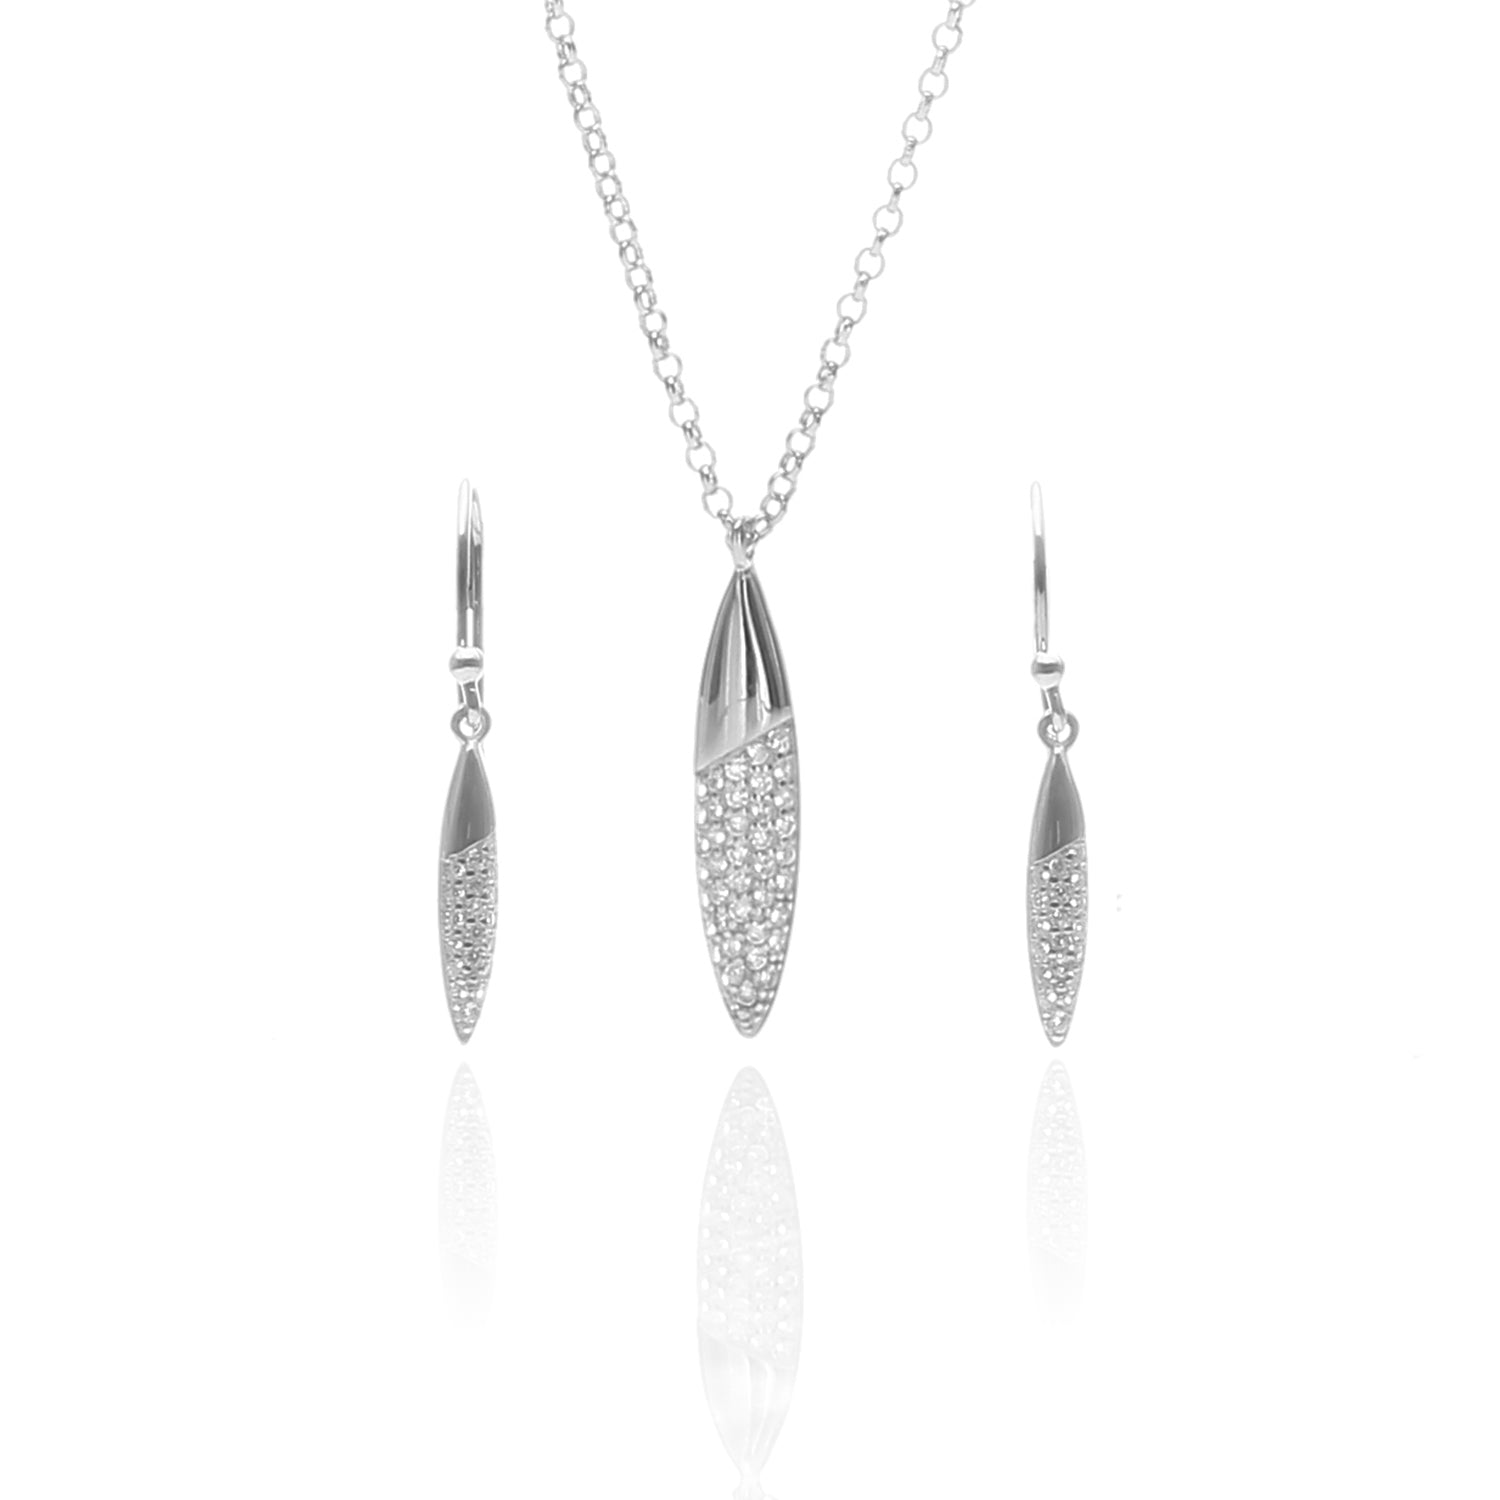 Edgware Pave Drop Pendant Necklace and Earrings Set - ARJW1028RD ARCADIO